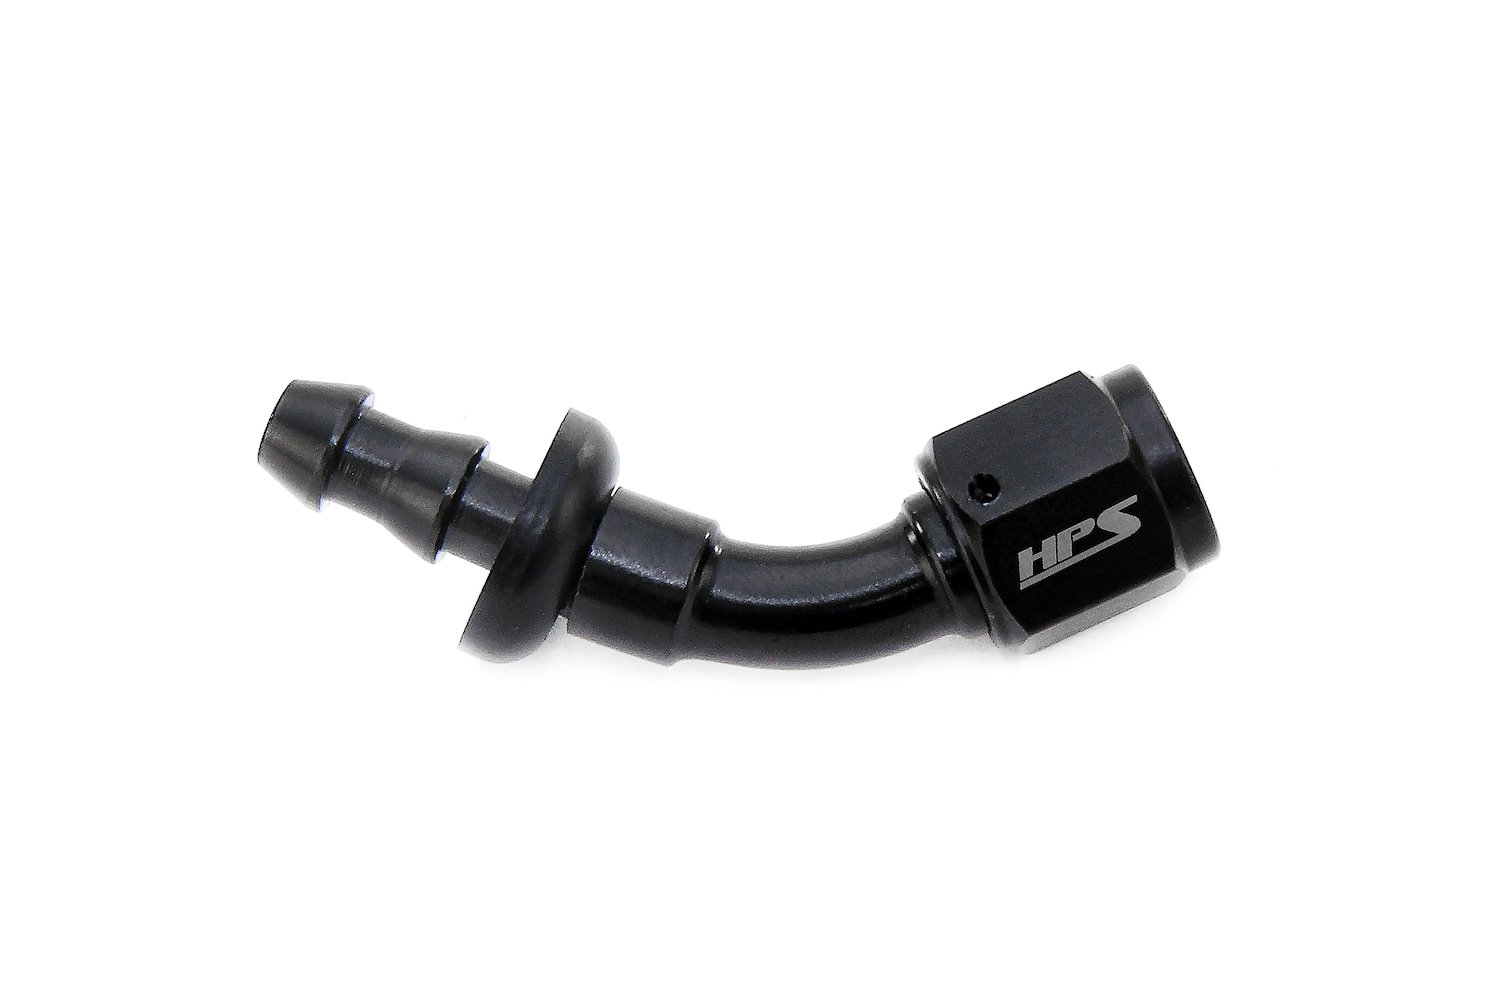 150-3006 150 Series 30-Deg Hose End, Tool-Free Assembly Hose Ends, For Push-On Style Hoses, Easy To Use